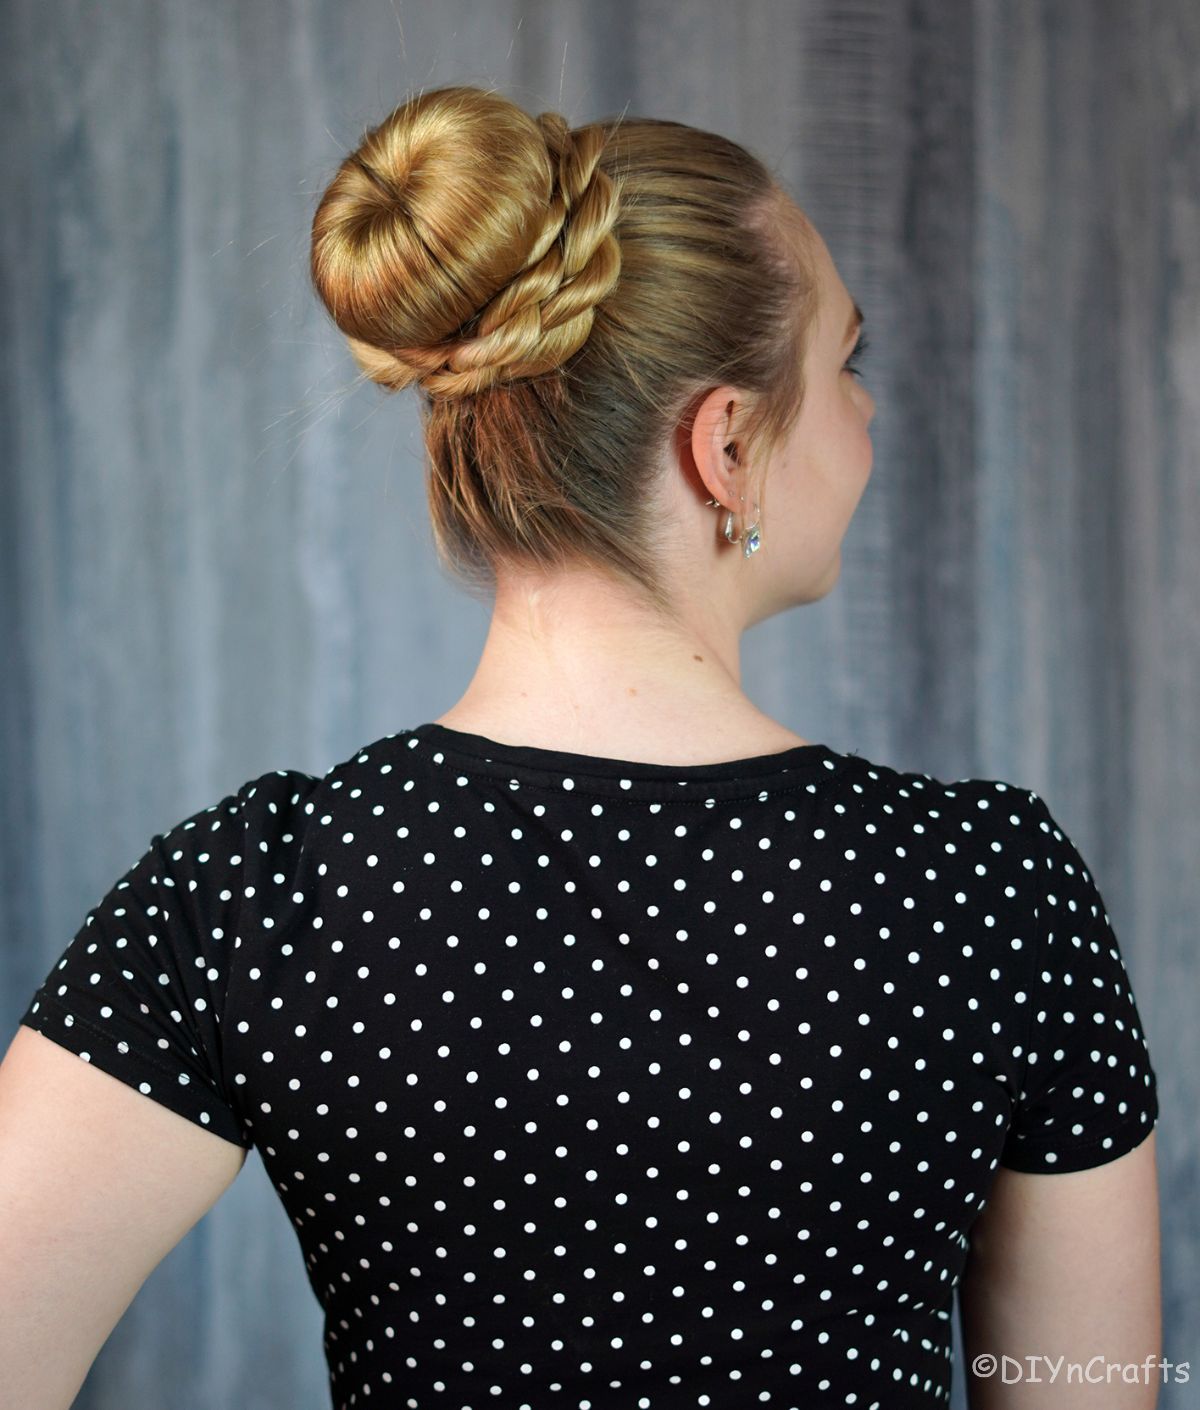 lady in black and white polka dot dress with high bun